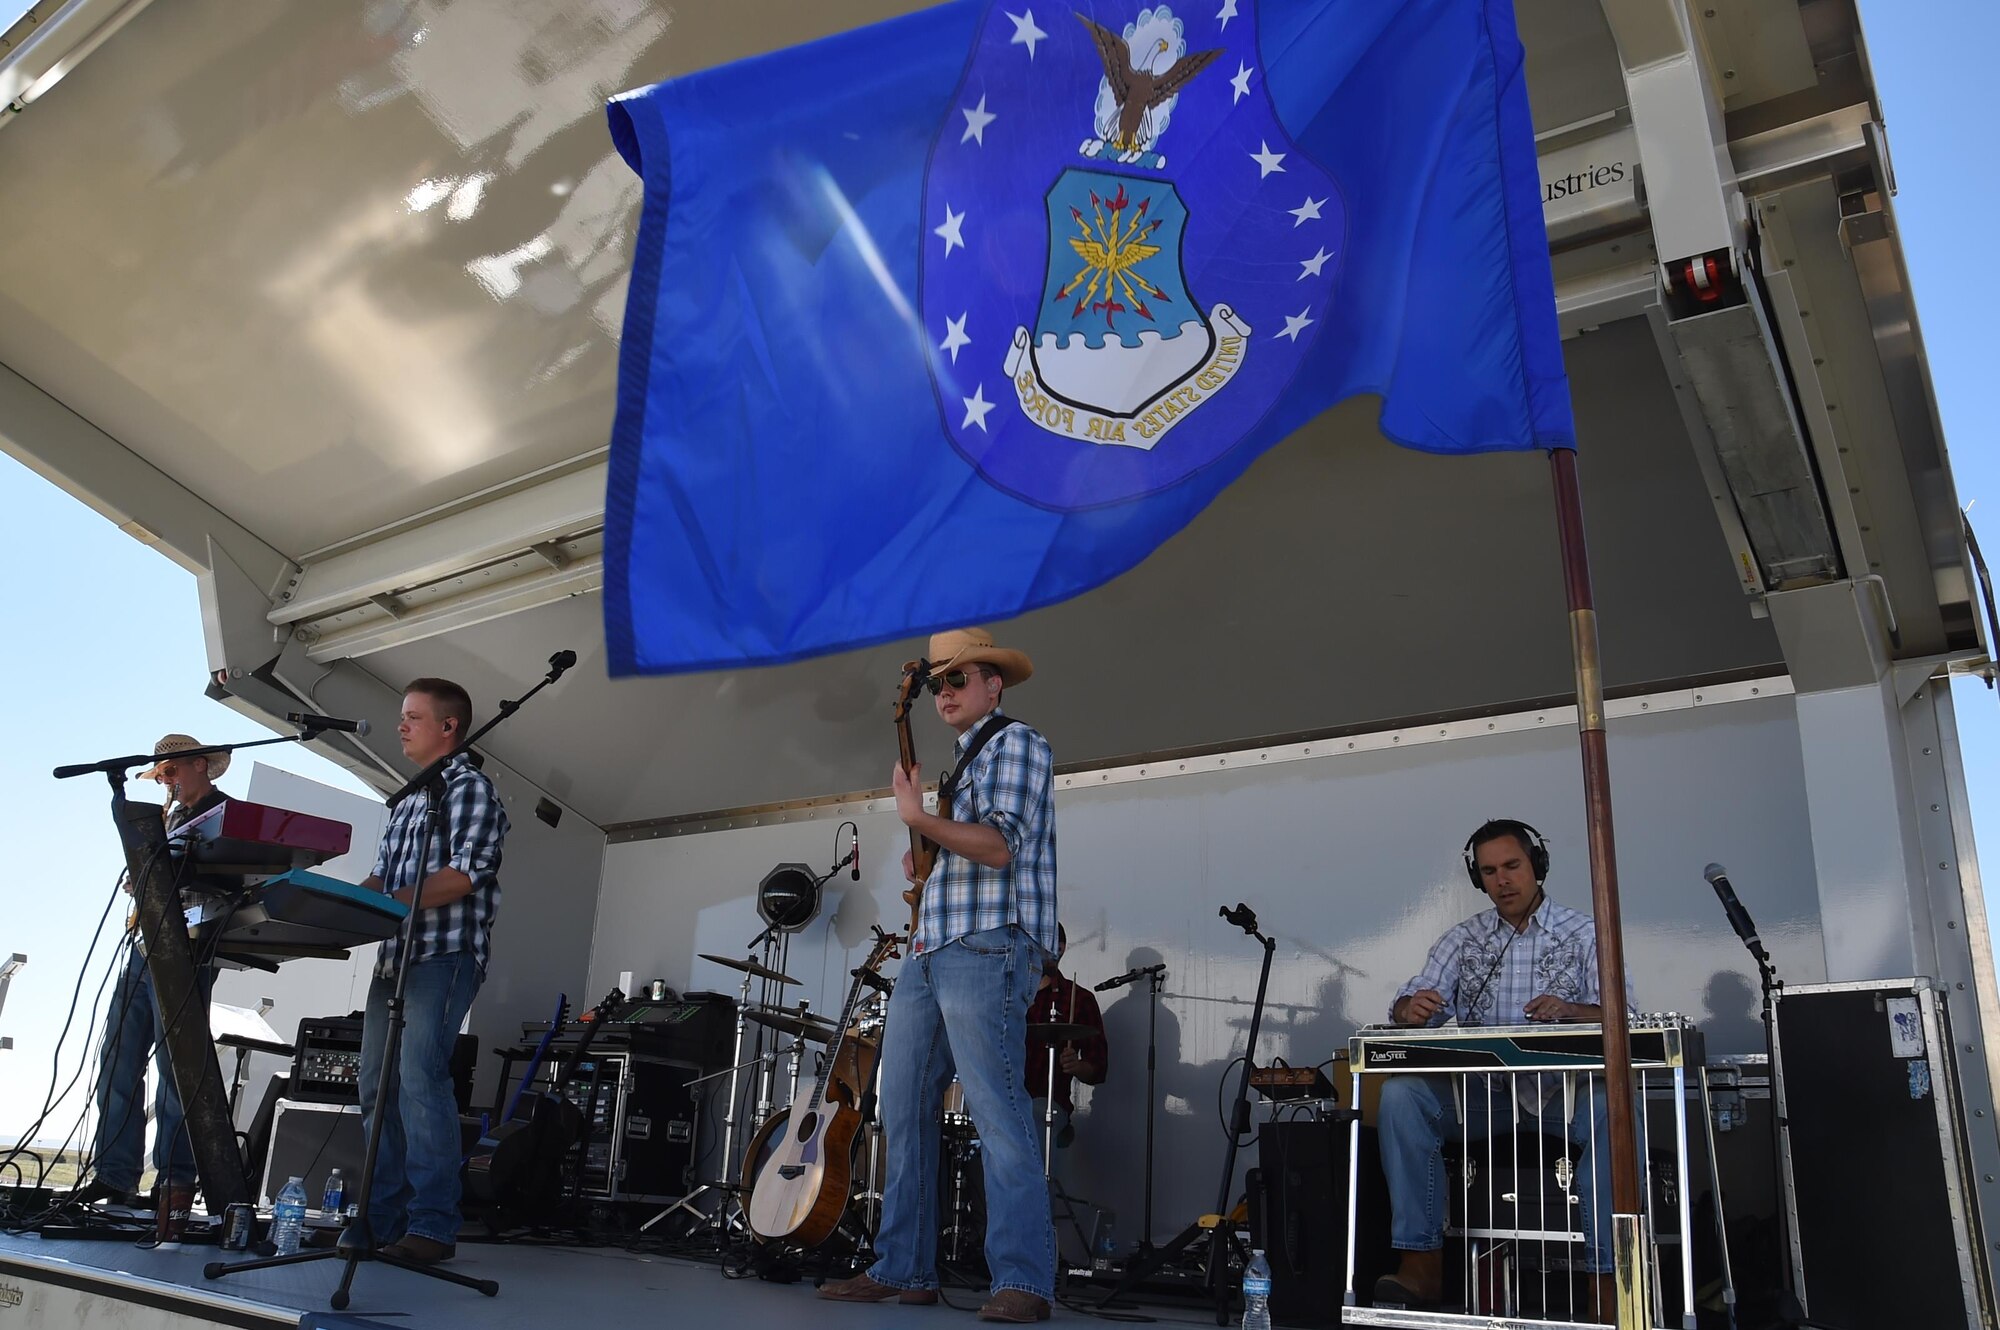 U.S. Air Force Academy Band, Wild Blue Country, plays country and rock music during the Summer Slam Base Picnic at Schriever Air Force Base, Colorado, Friday, July 15, 2016. (U.S. Air Force photo/2nd Lt. Darren Domingo)